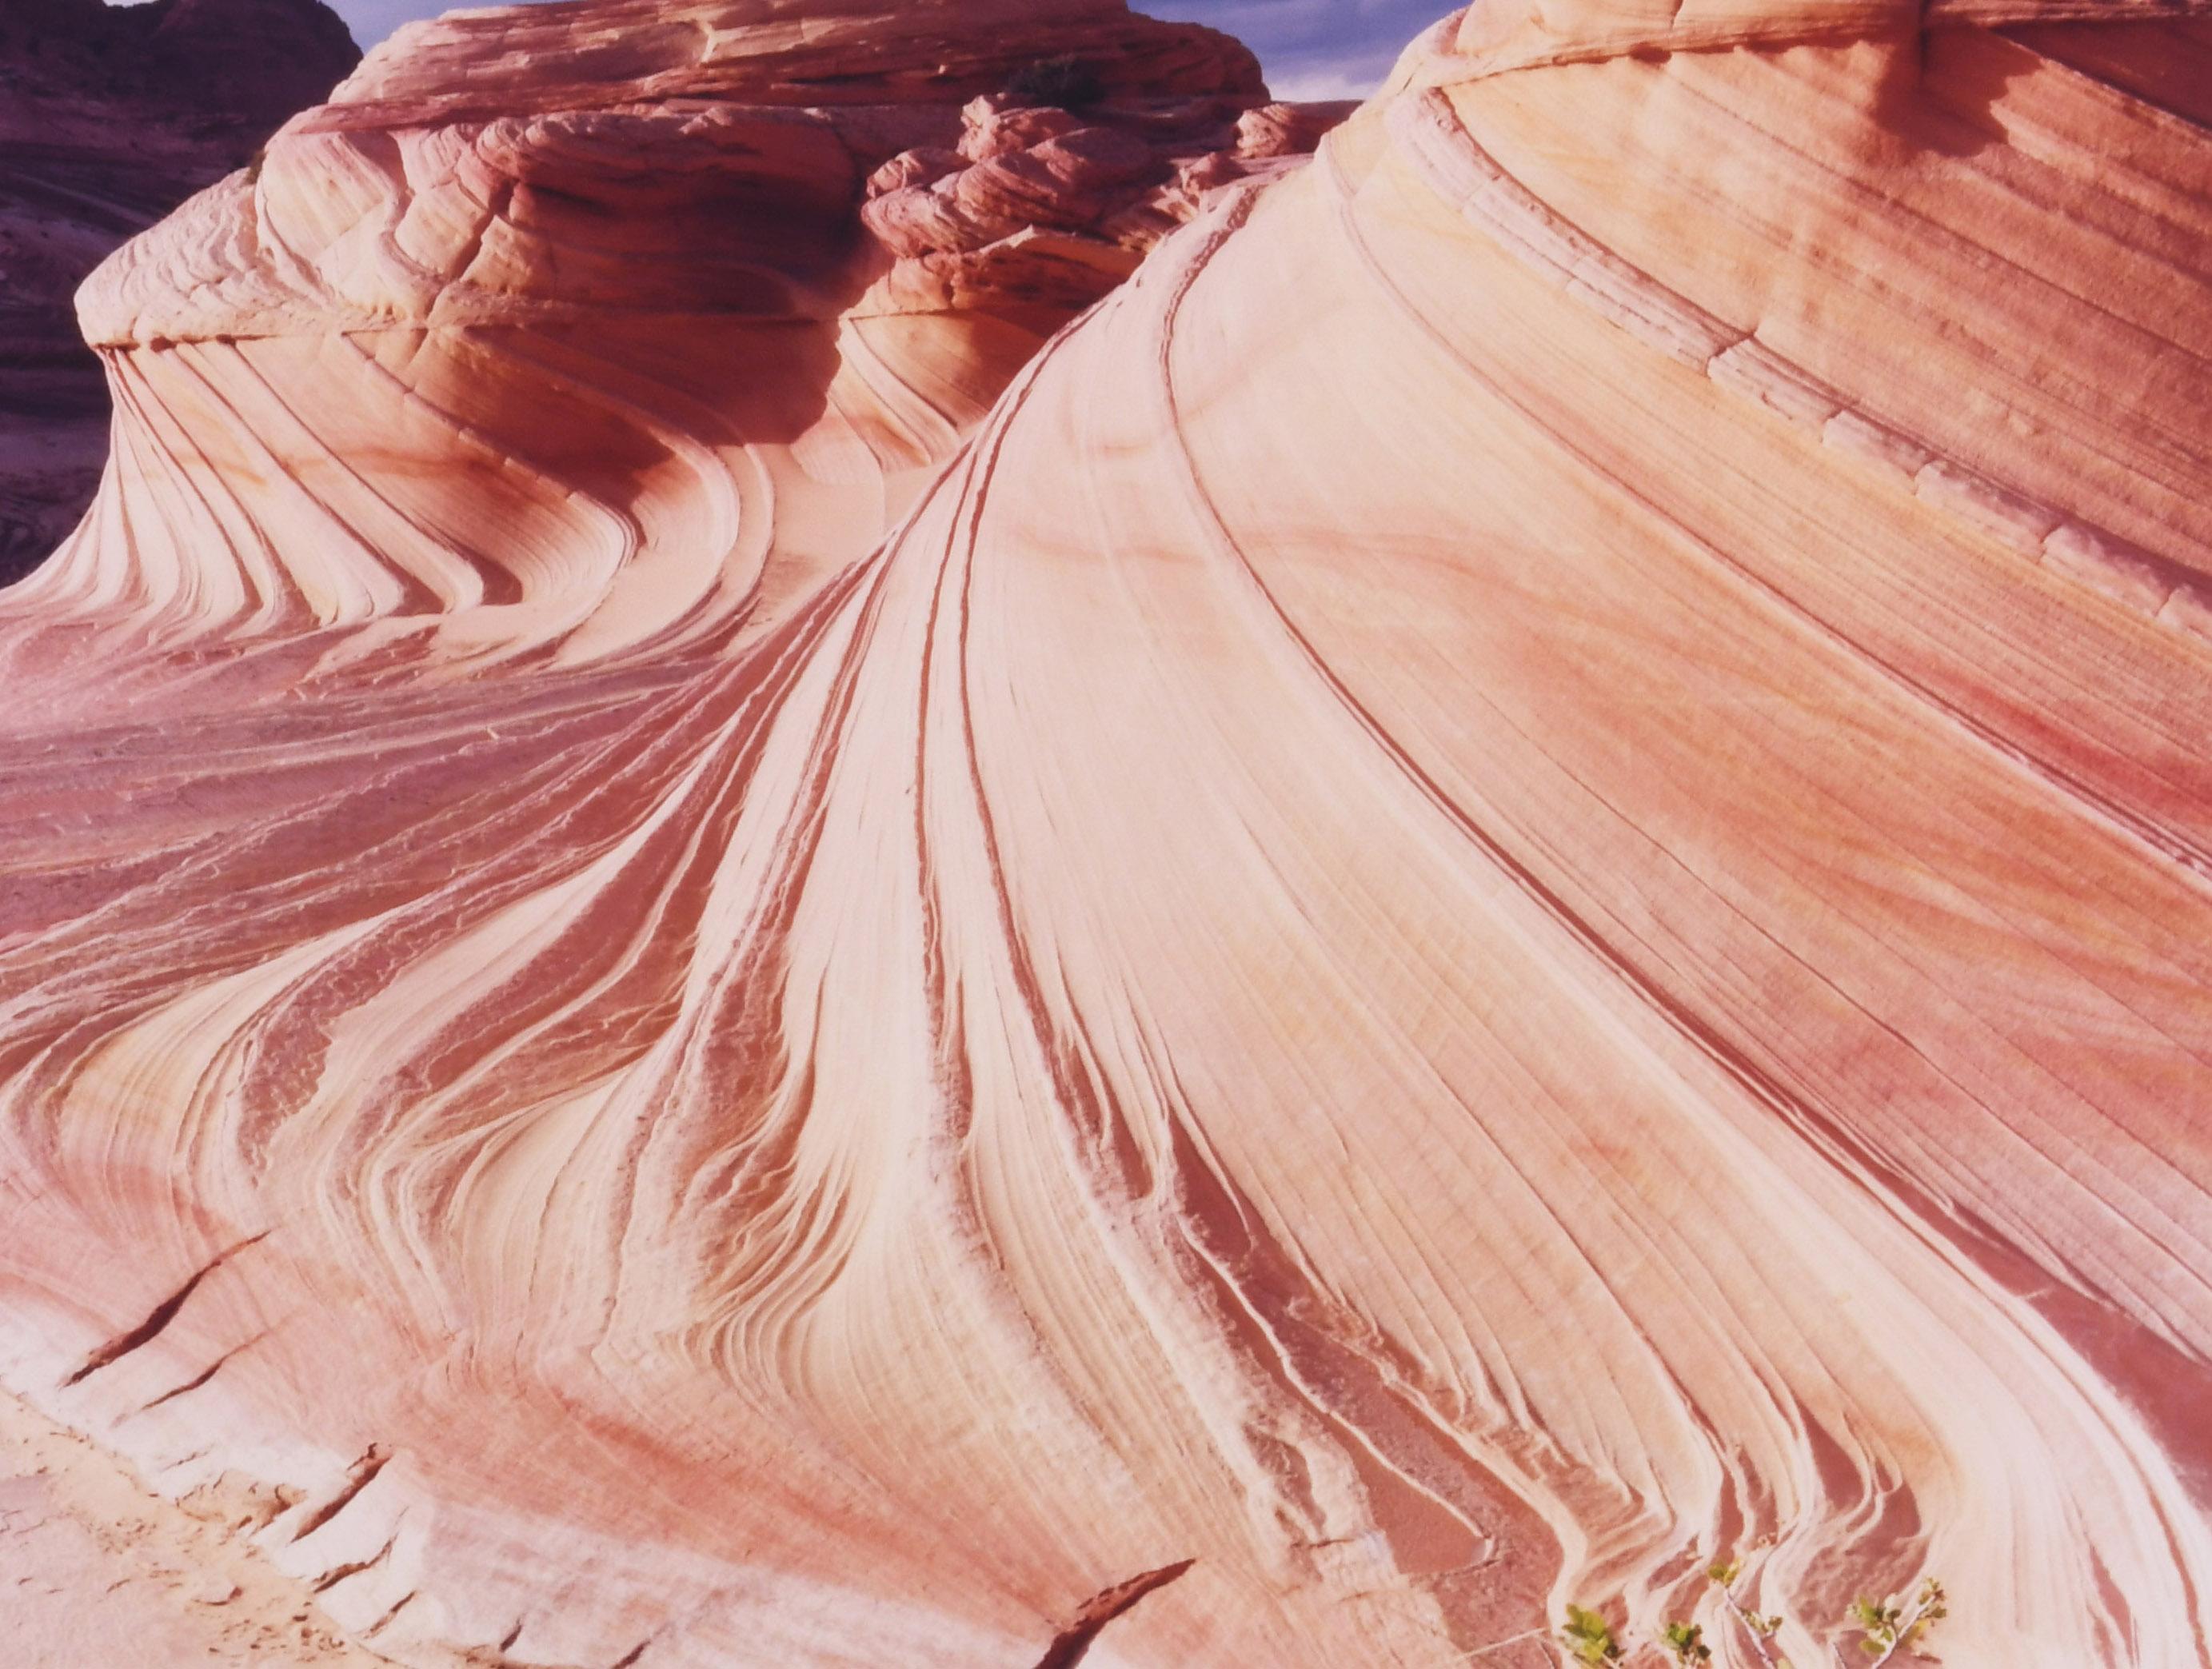 The Second Wave, Coyote Buttes, Paria Canyon-Vermilion Clifts Wilderness, AR - Photograph by Unknown